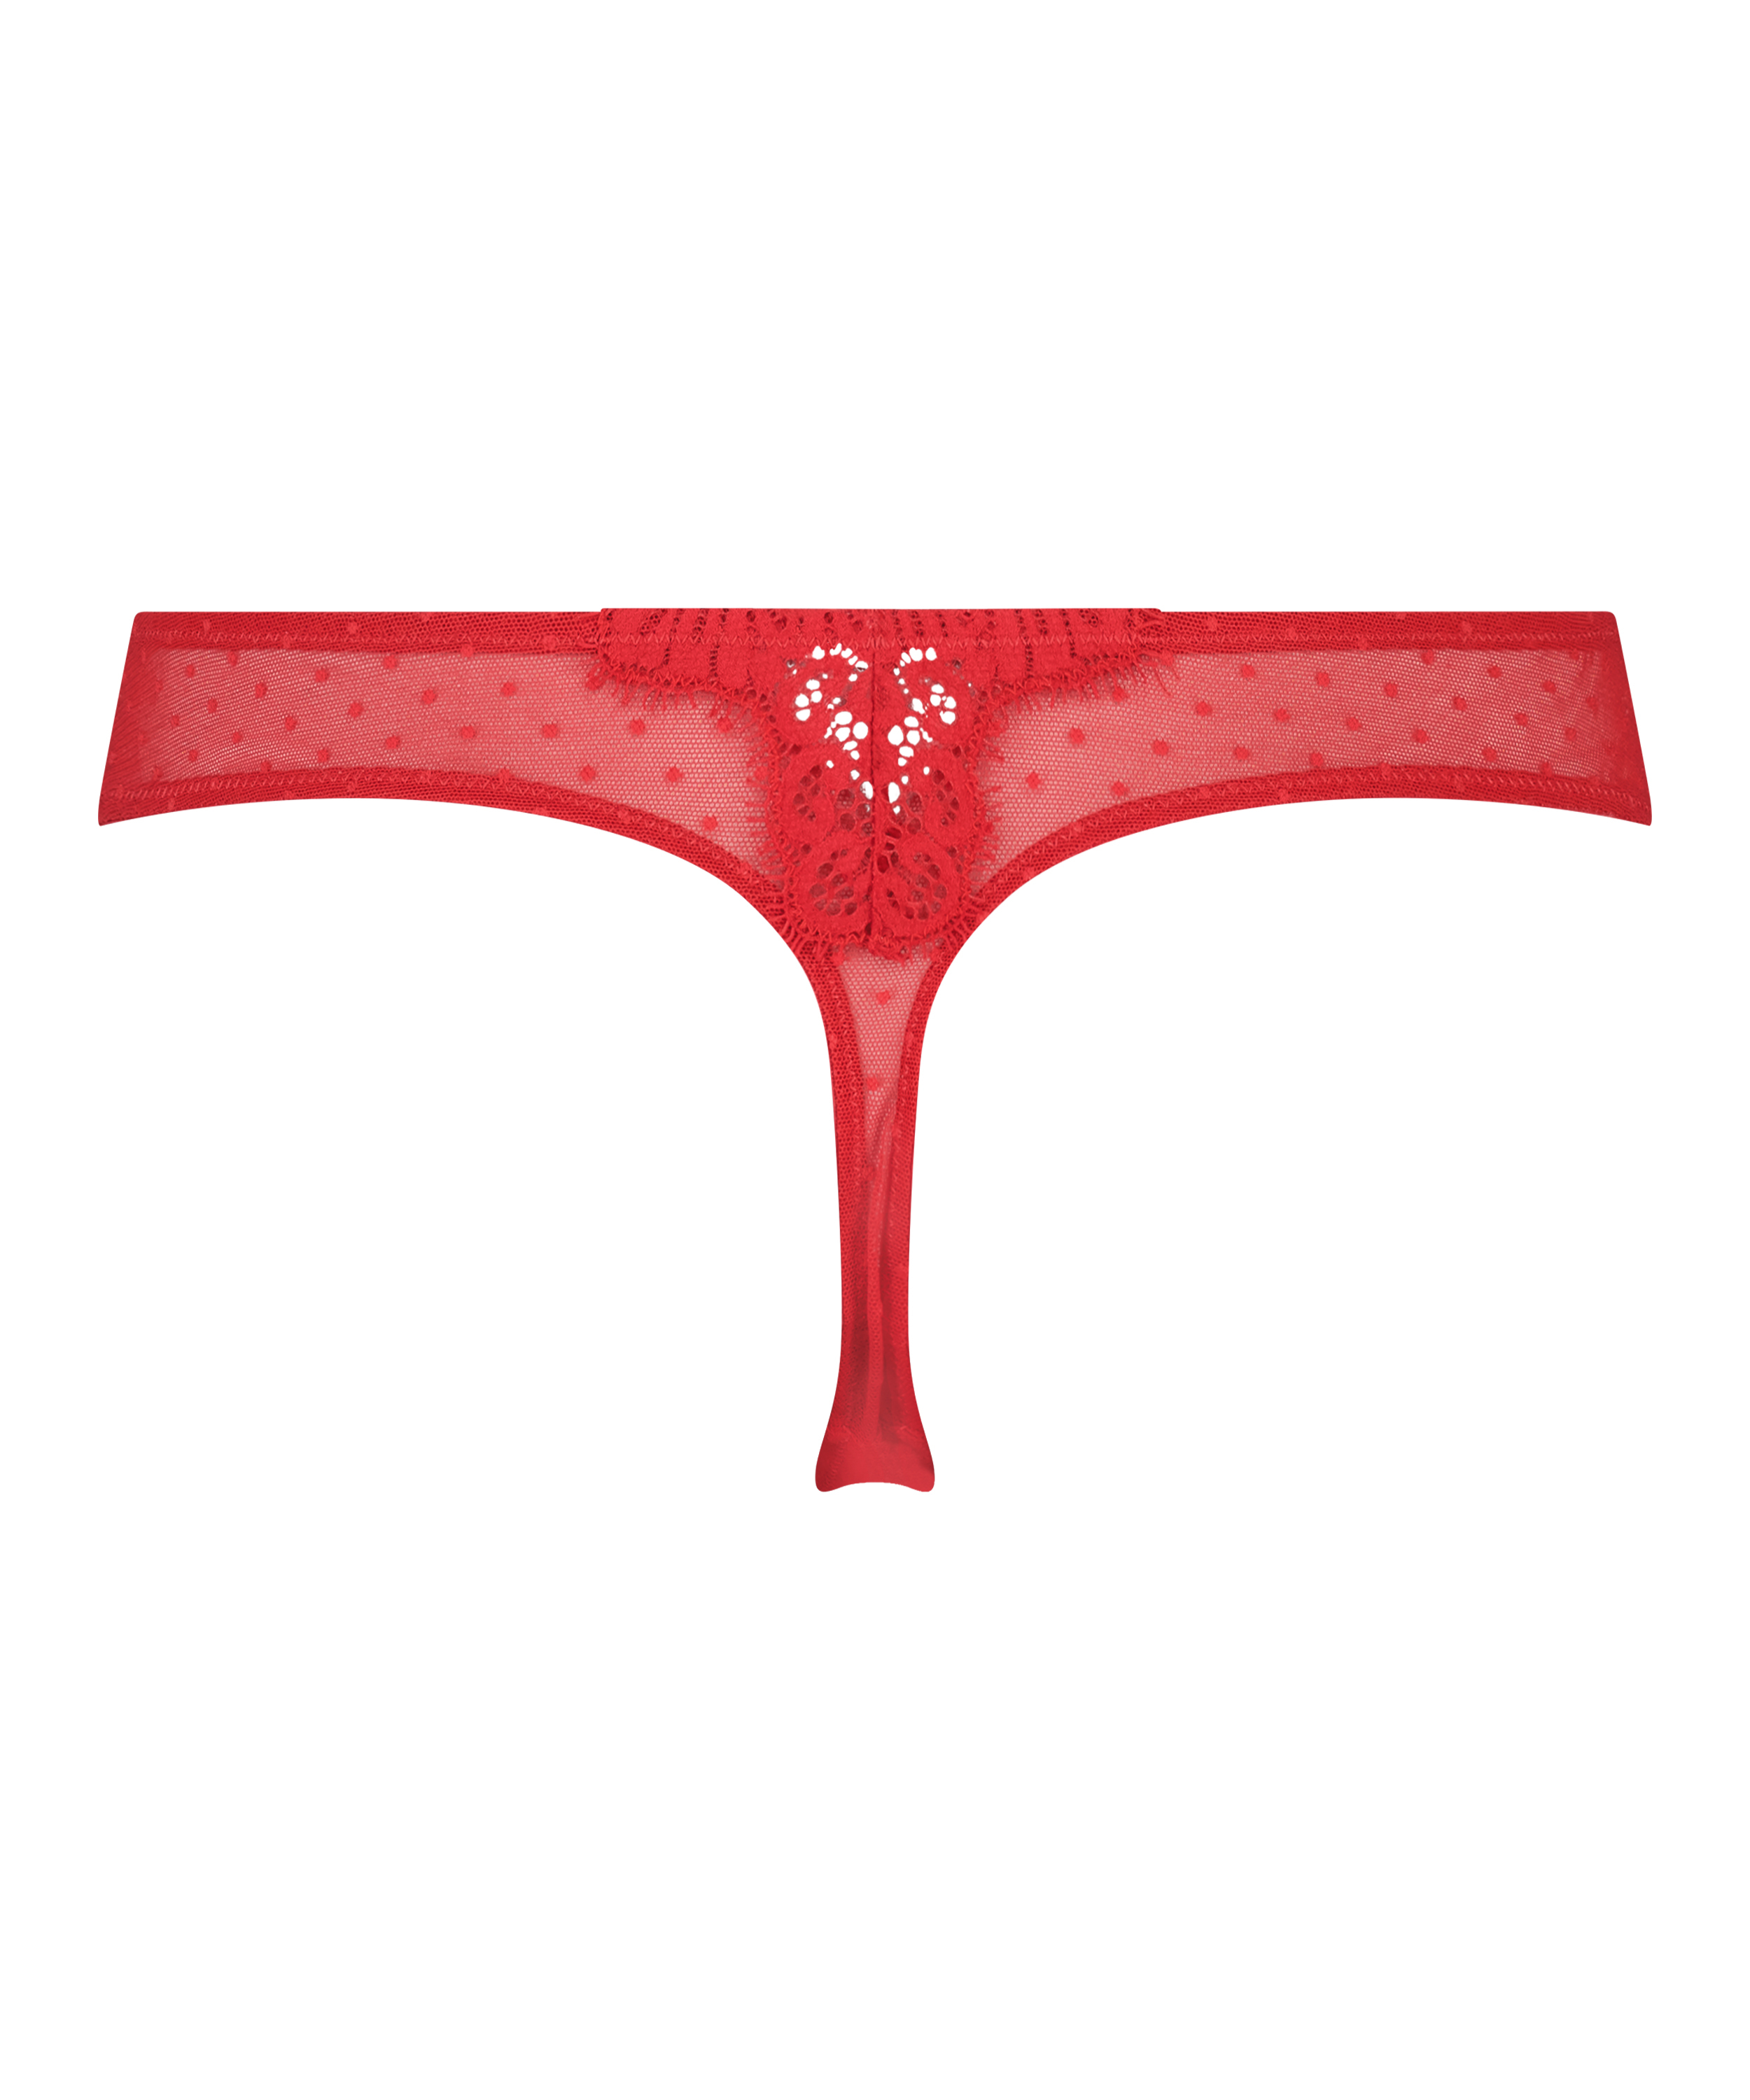 Marilee Thong , Red, main